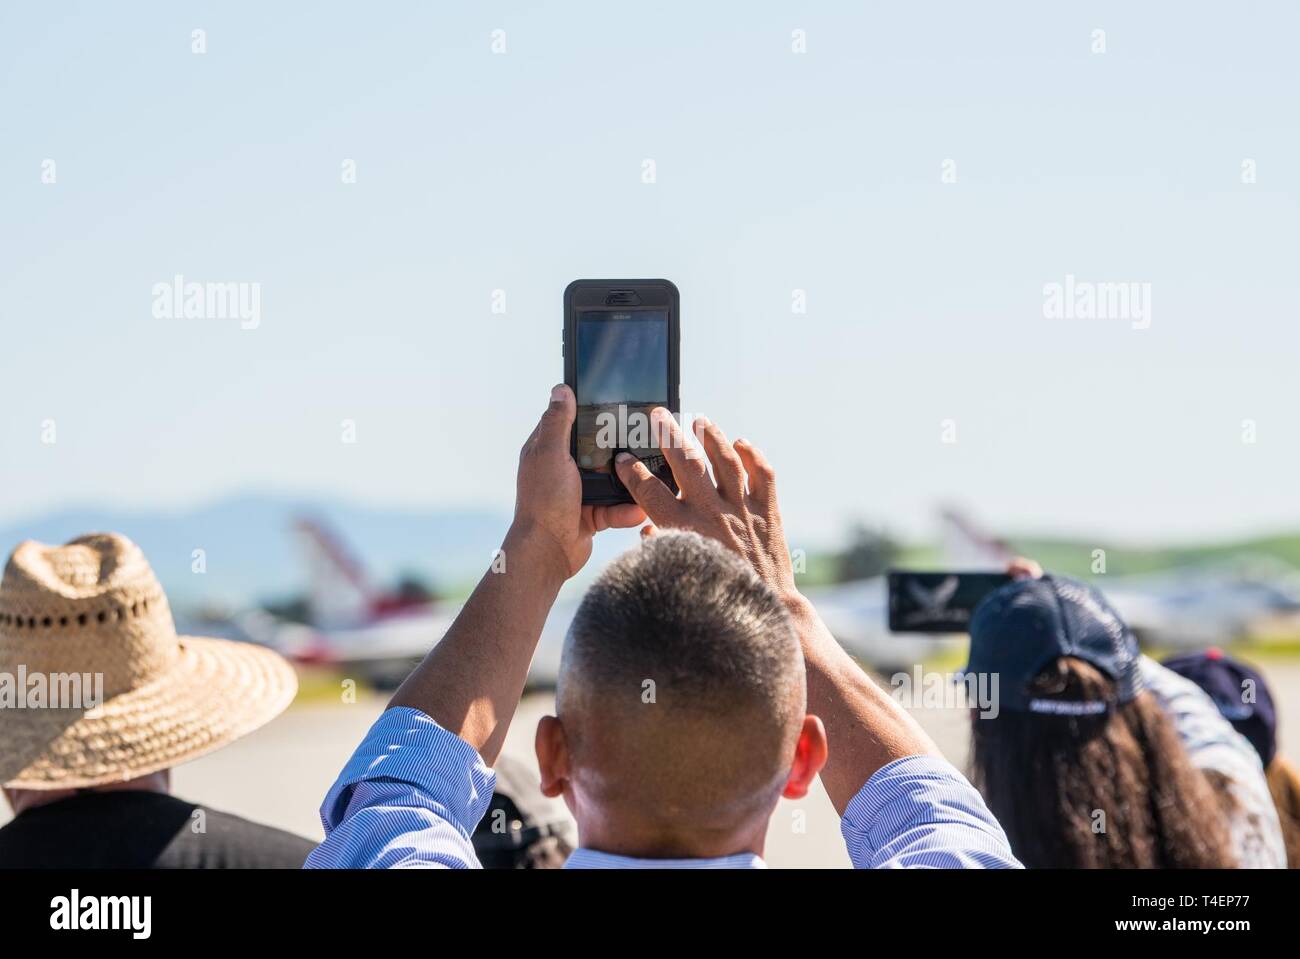 A spectator takes a video during the U.S. Air Force Thunderbirds demonstration teams performance during the “Thunder over the Bay” Air Show at Travis Air Force Base, California, March 31, 2019. In addition to the U.S. Air Force Thunderbirds aerial demonstration team, the two-day event featured performances by the U.S. Army Golden Knights parachute team, flyovers, and static displays. The event honored hometown heroes like police officers, firefighters, nurses, teachers and ordinary citizens whose selfless work made their communities safer and enhanced the quality of life. Stock Photo